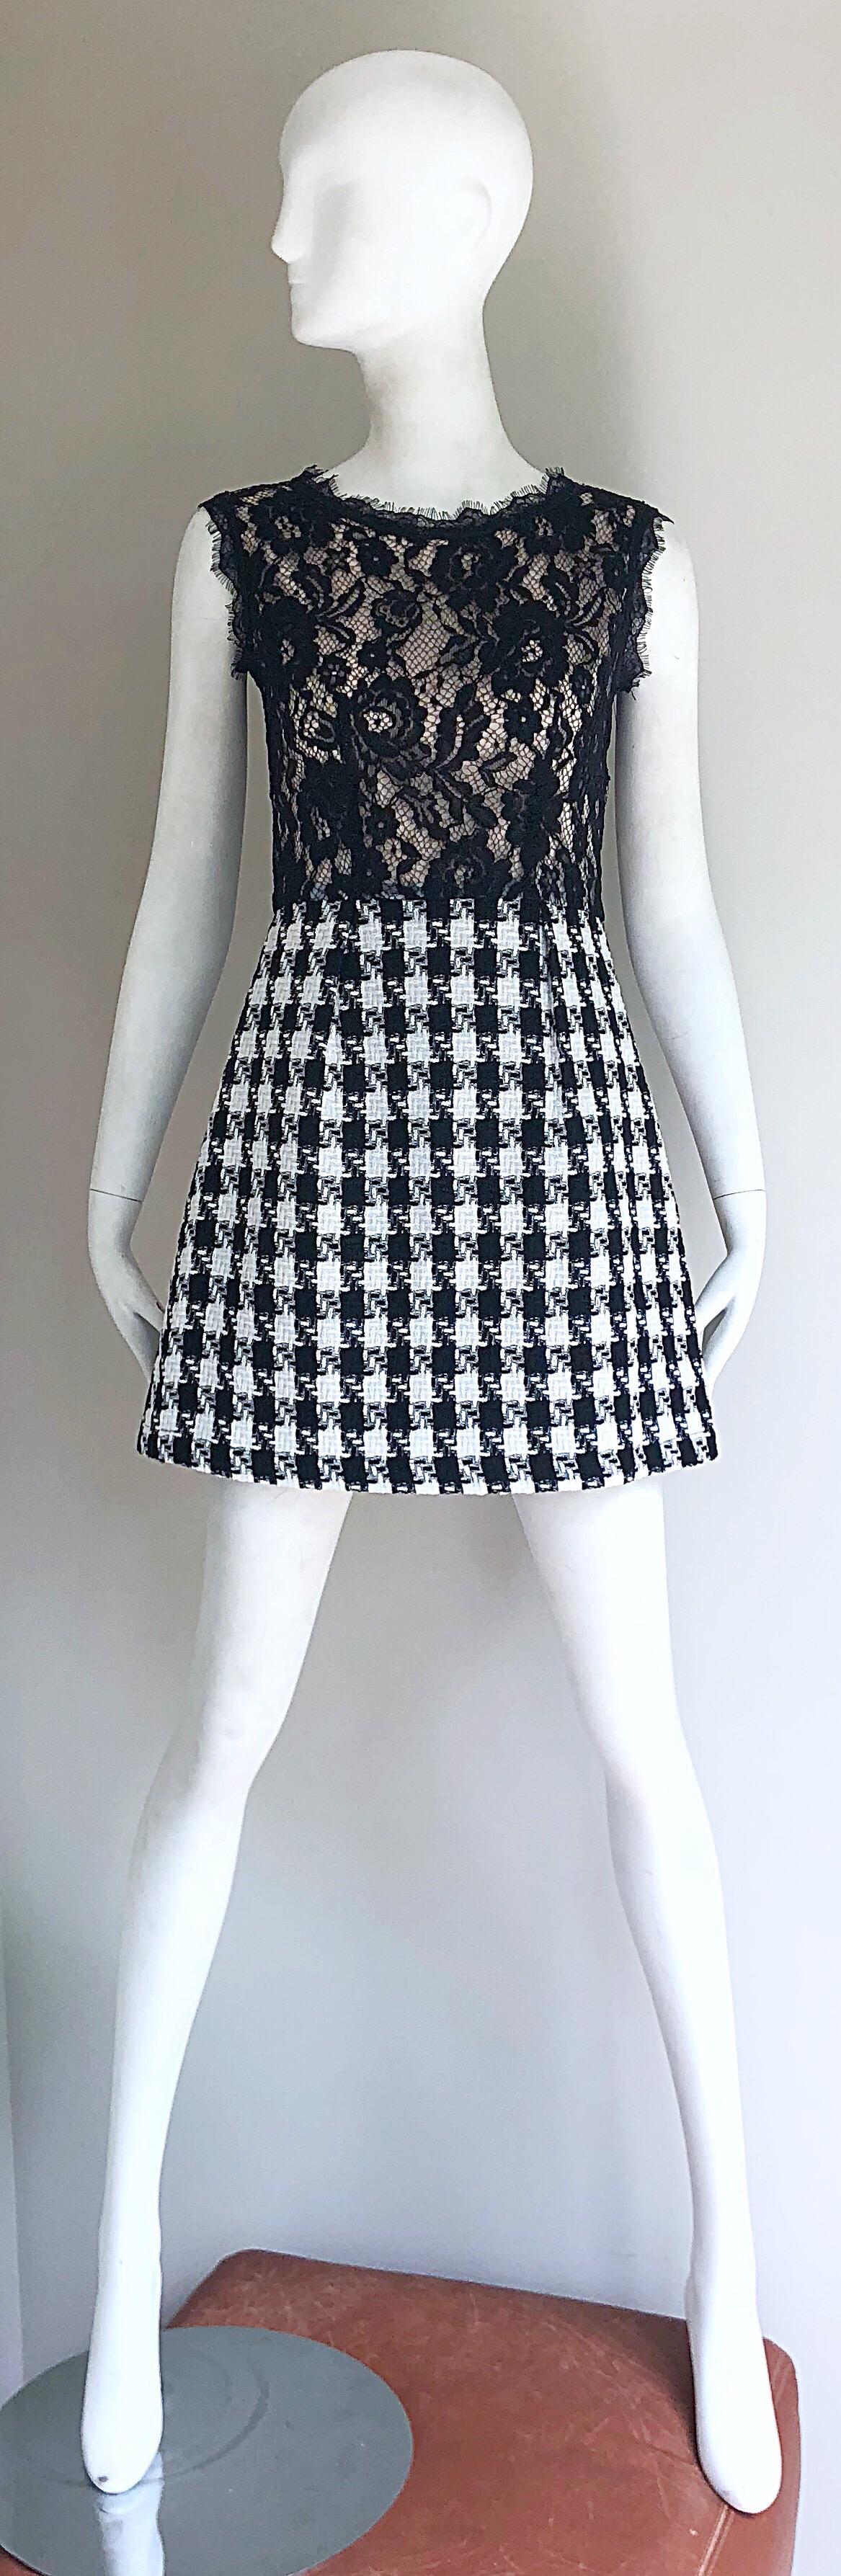 Marc Jacobs Early 2000s Black and White Lace Houndstooth Checkered Mini Dress For Sale 6